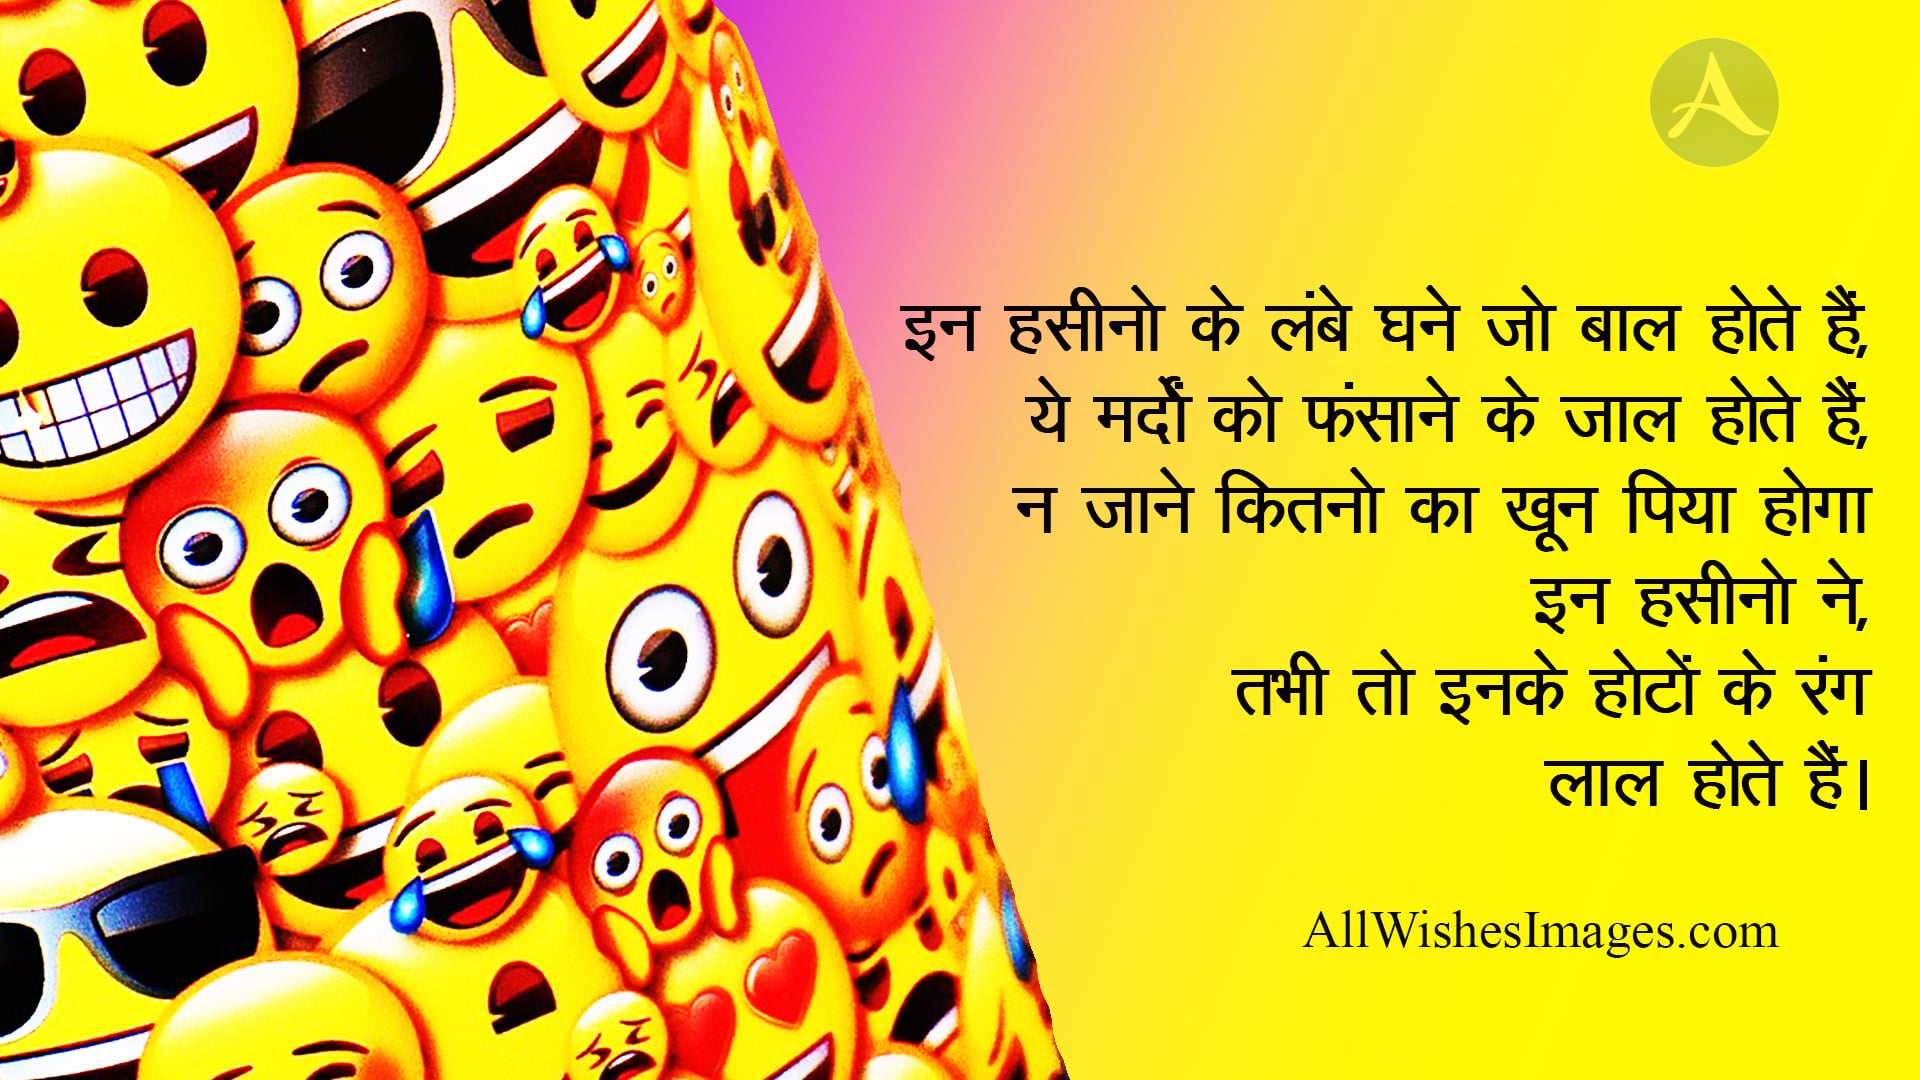 Funny Shayari In Hindi Hd Download - All Wishes Images - Images for WhatsApp